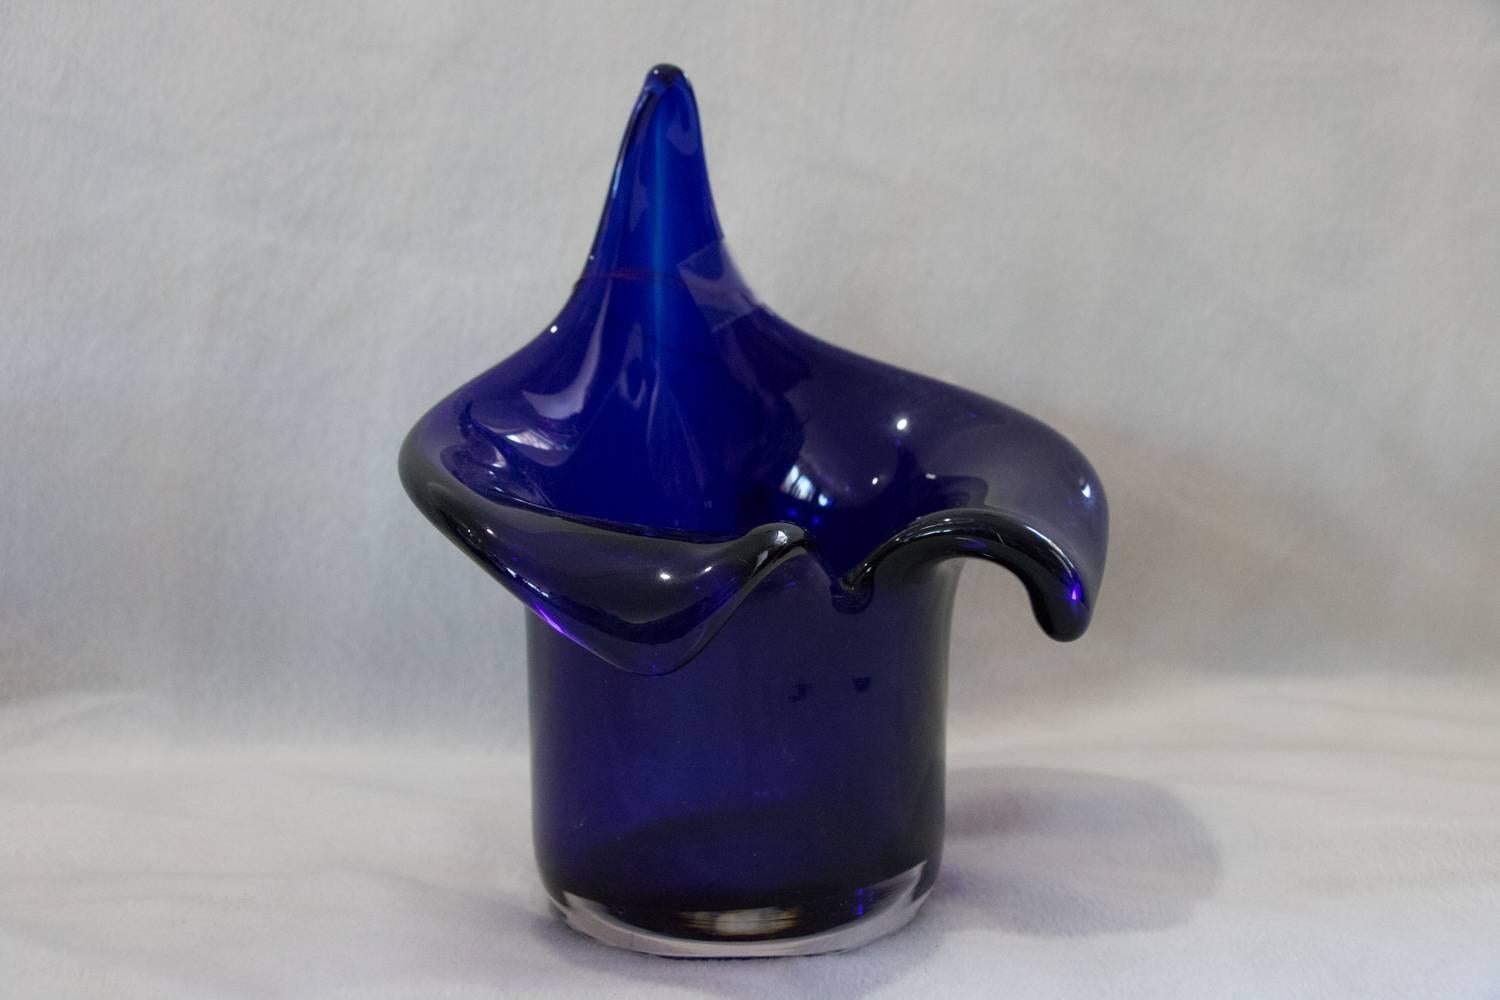 Set of Seven Glorious Blue Glass Vases Mixed Shaped Sizes and Designs Handblown 2